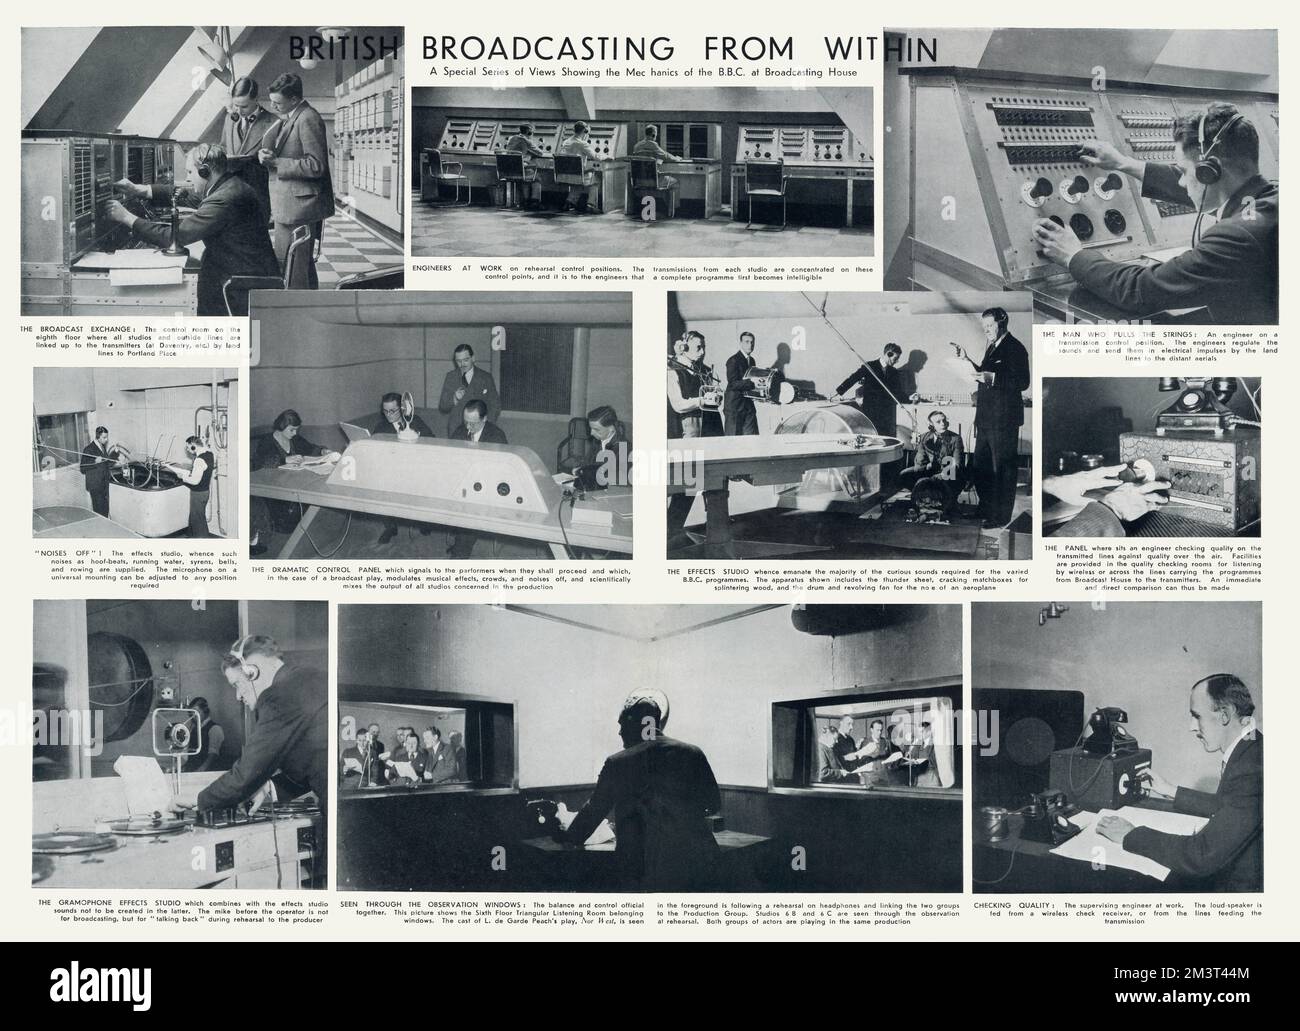 A special series of views showing the mechanics of the B.B.C. at Broadcasting House, the first camera survey of the corporation featured in The Sphere. Stock Photo